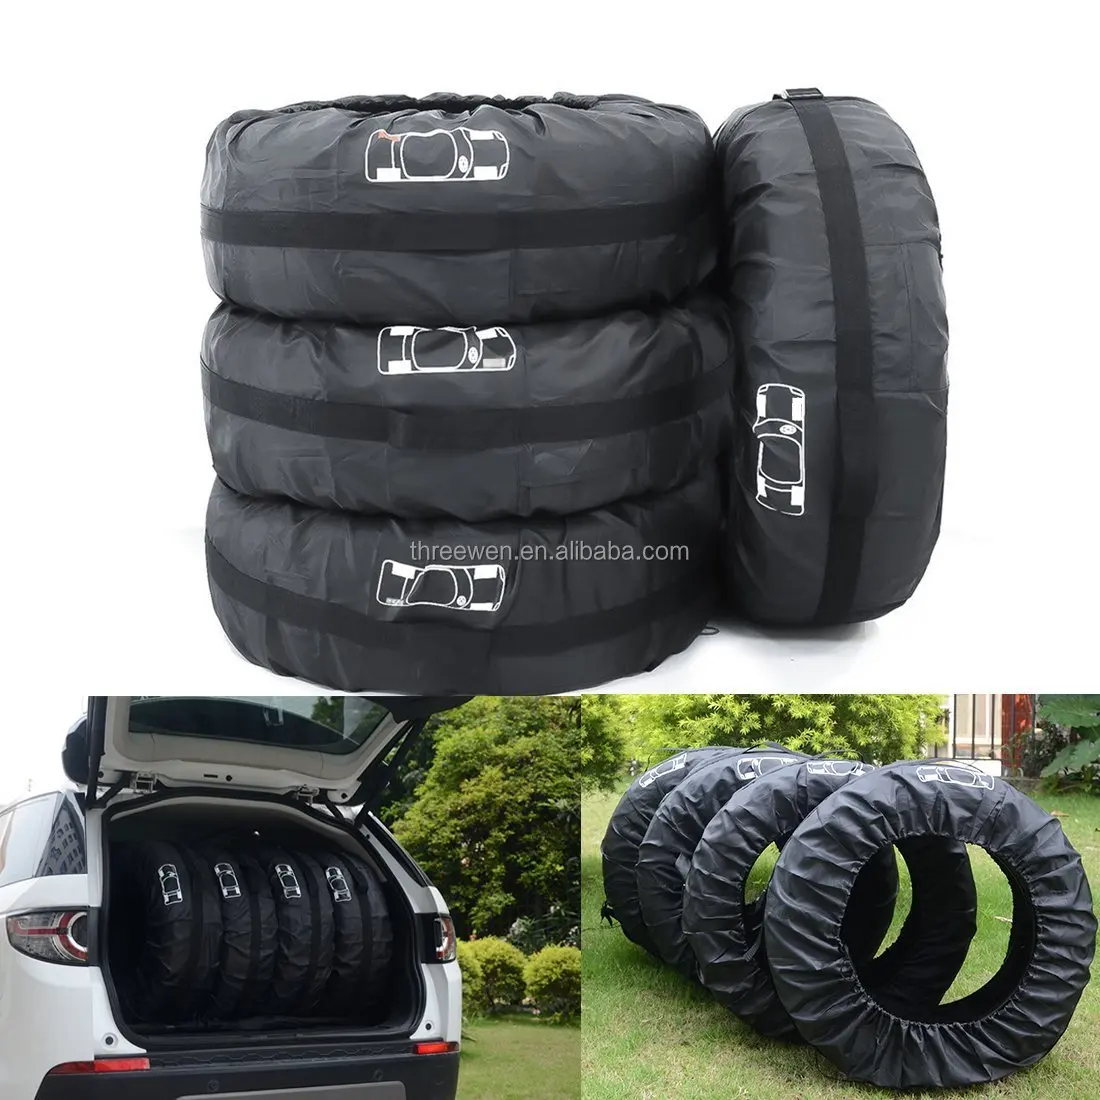 Heavy Gauge Polyester Non-Vinyl Seasonal TIRE Storage Bag by JUMBL Stores UP to 4 Tires! 